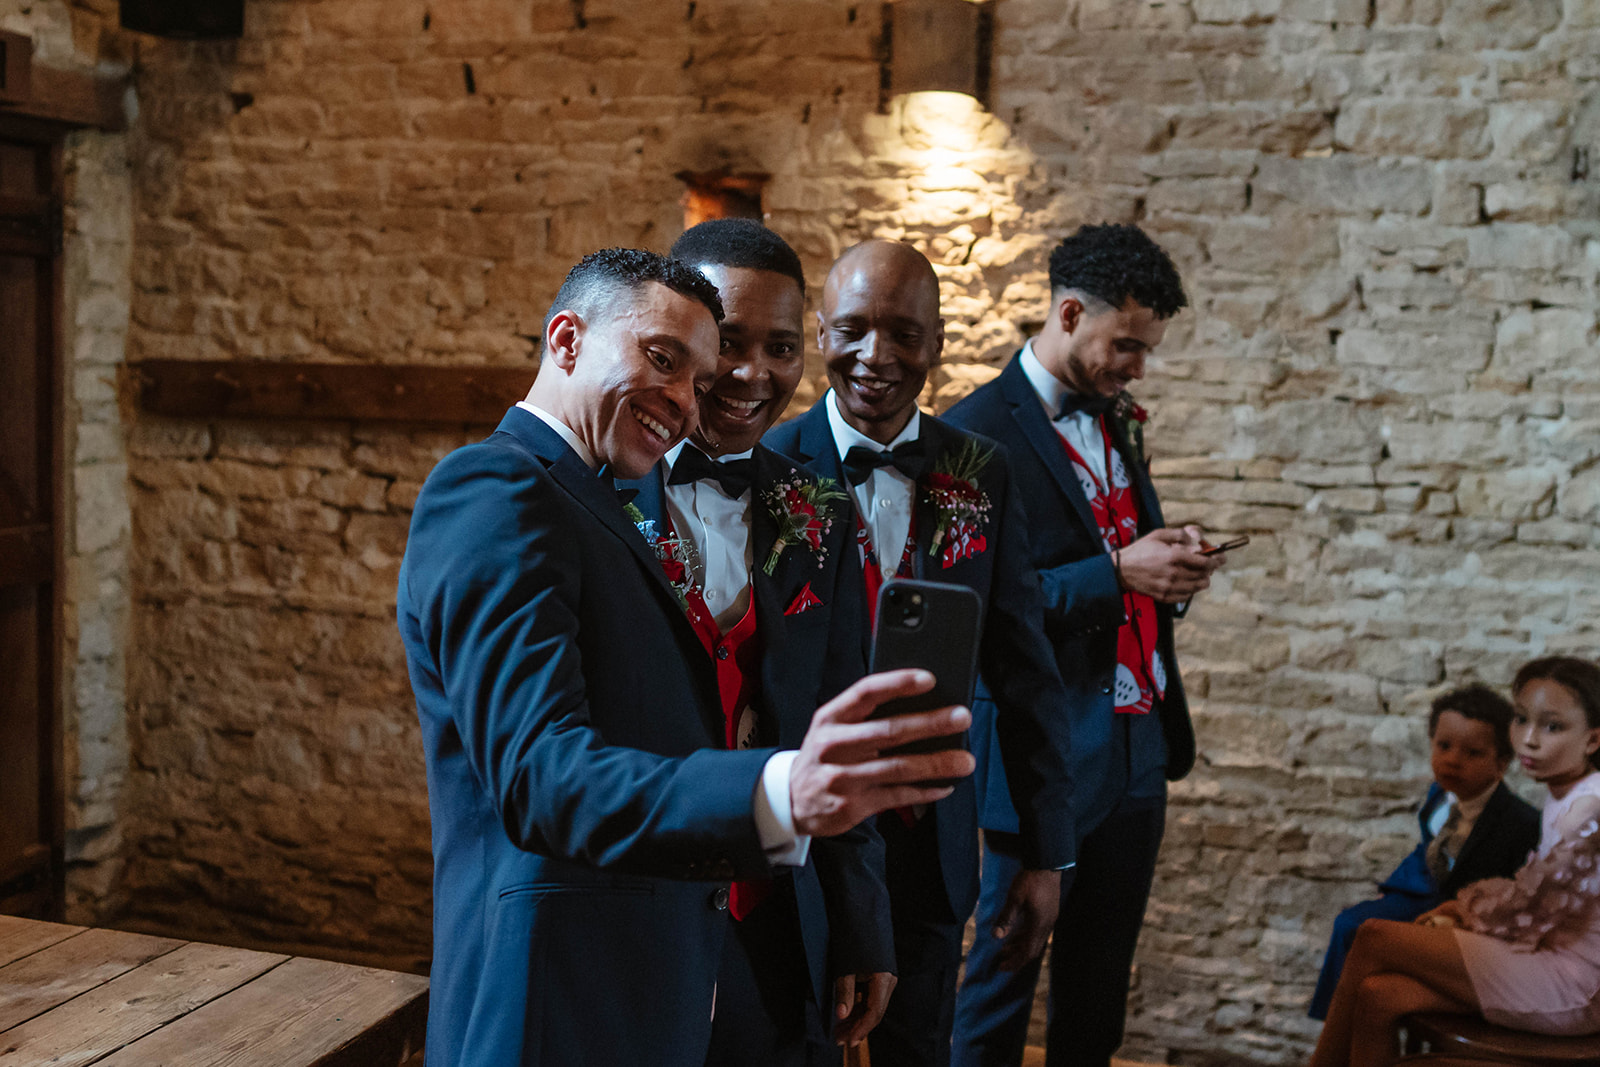 Groom party taking a selfie before the ceremony